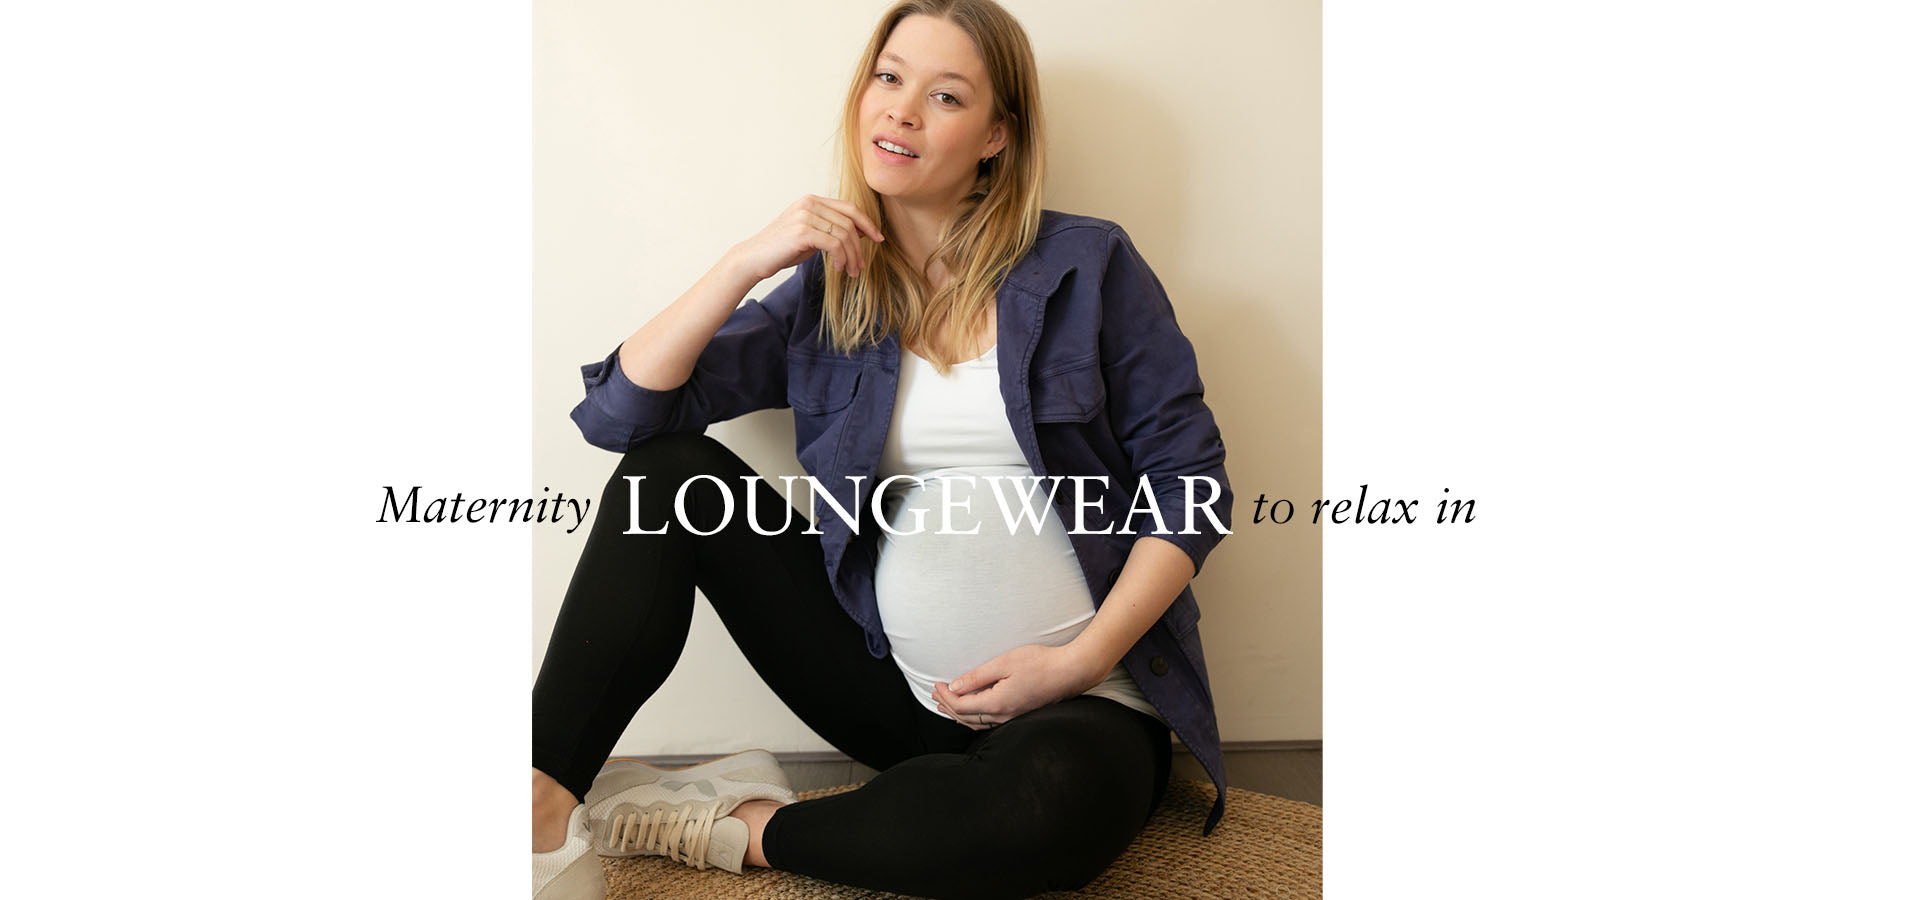 Maternity Loungewear to Relax in